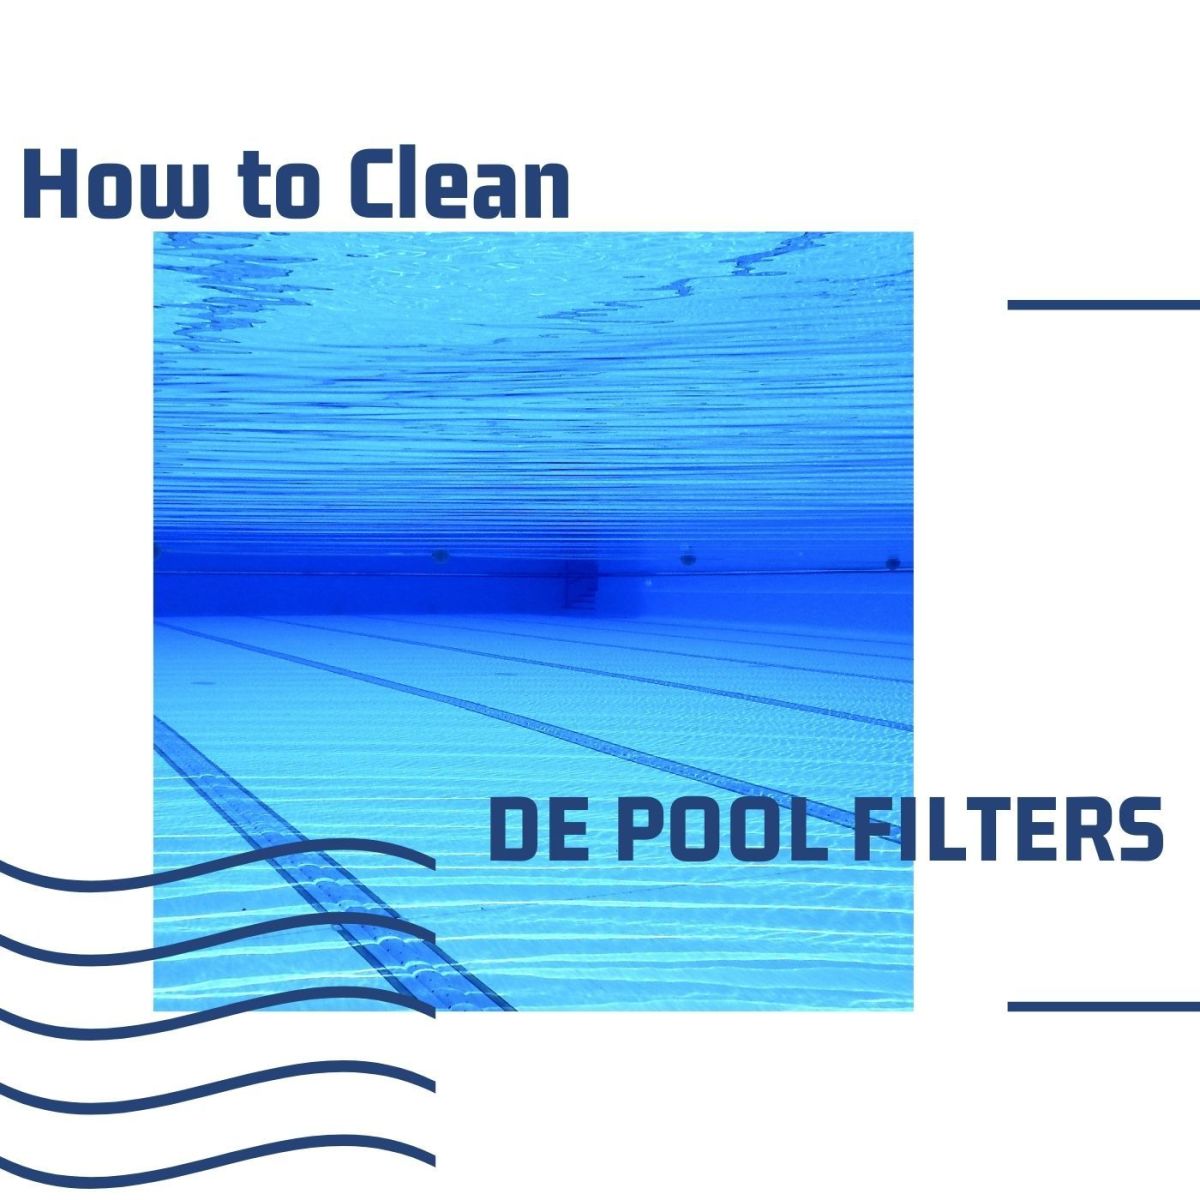 Cleaning DE filters isn't hard when you know what you are doing!